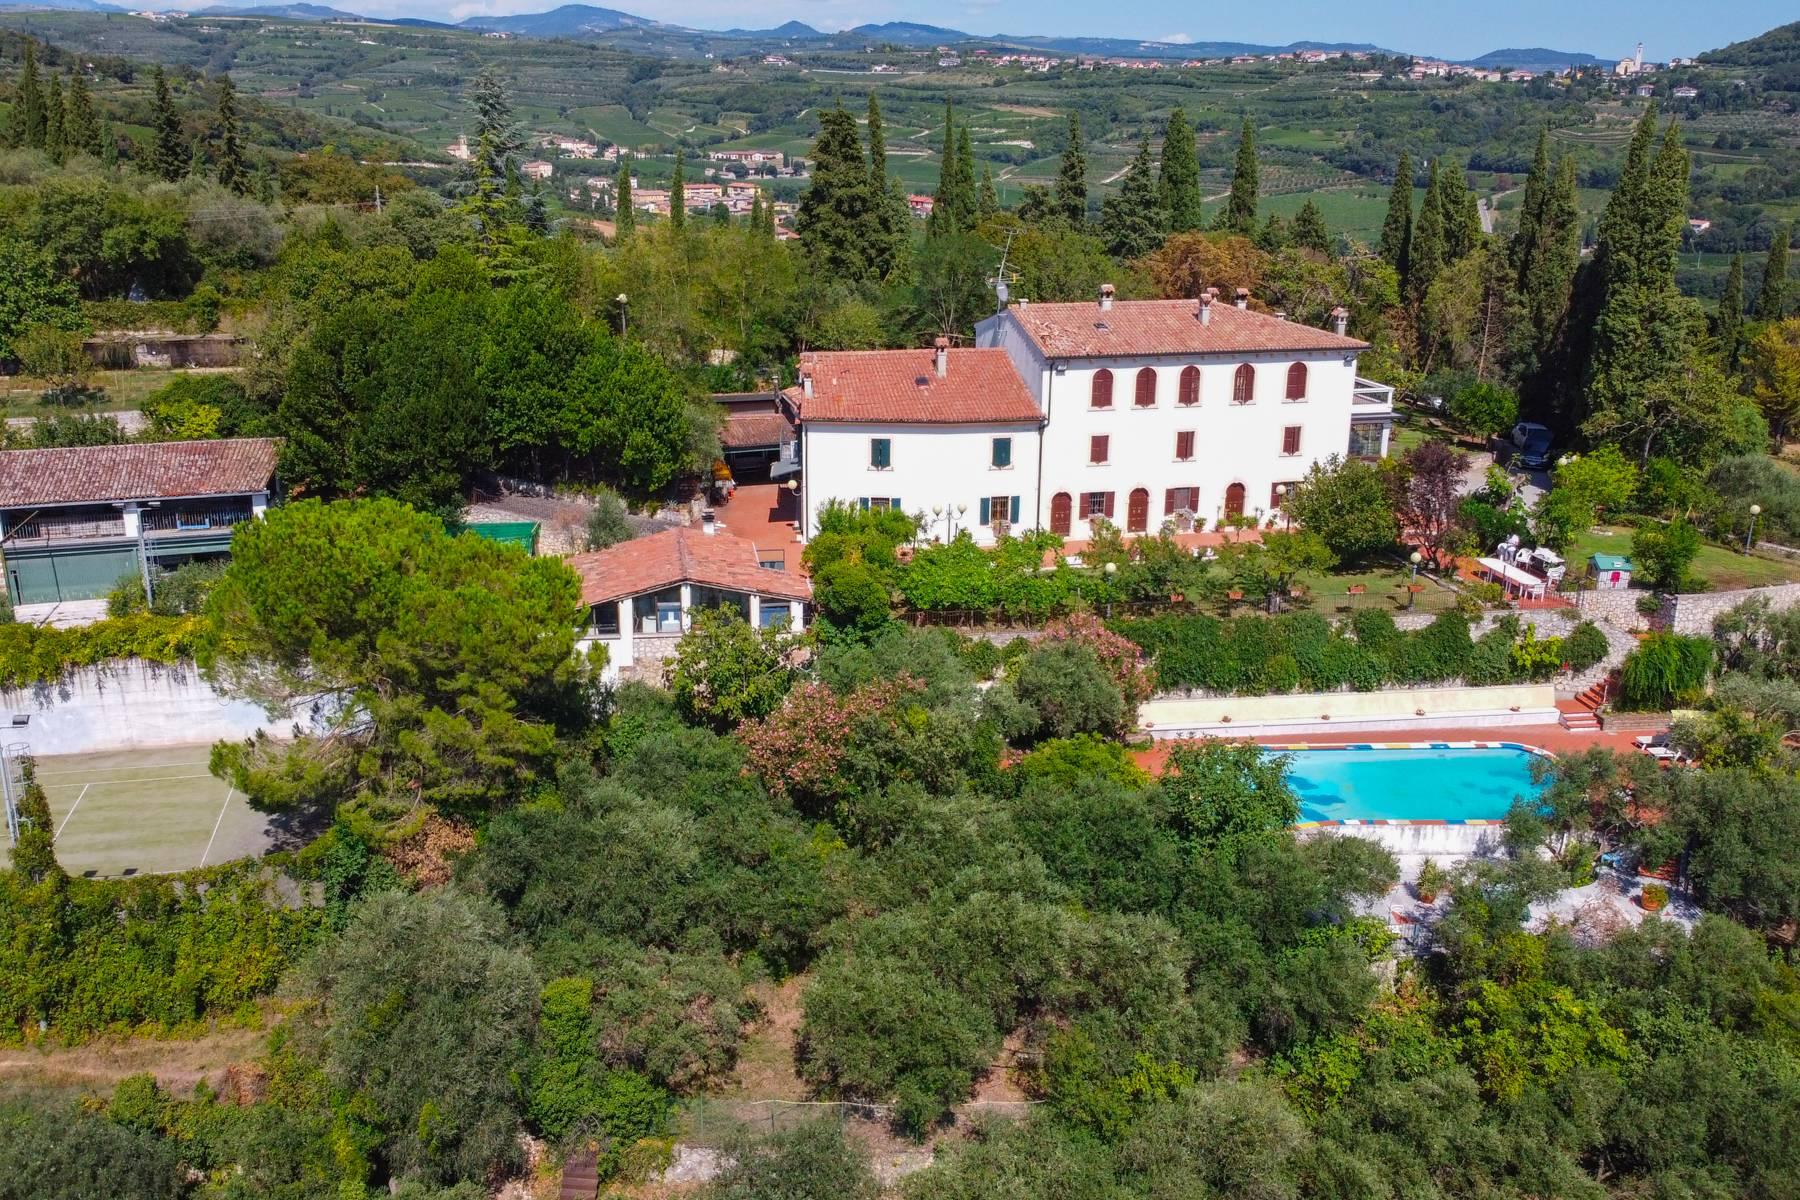 Historic country villa with swimming pool, tennis court and estate on the hills of Verona - 26